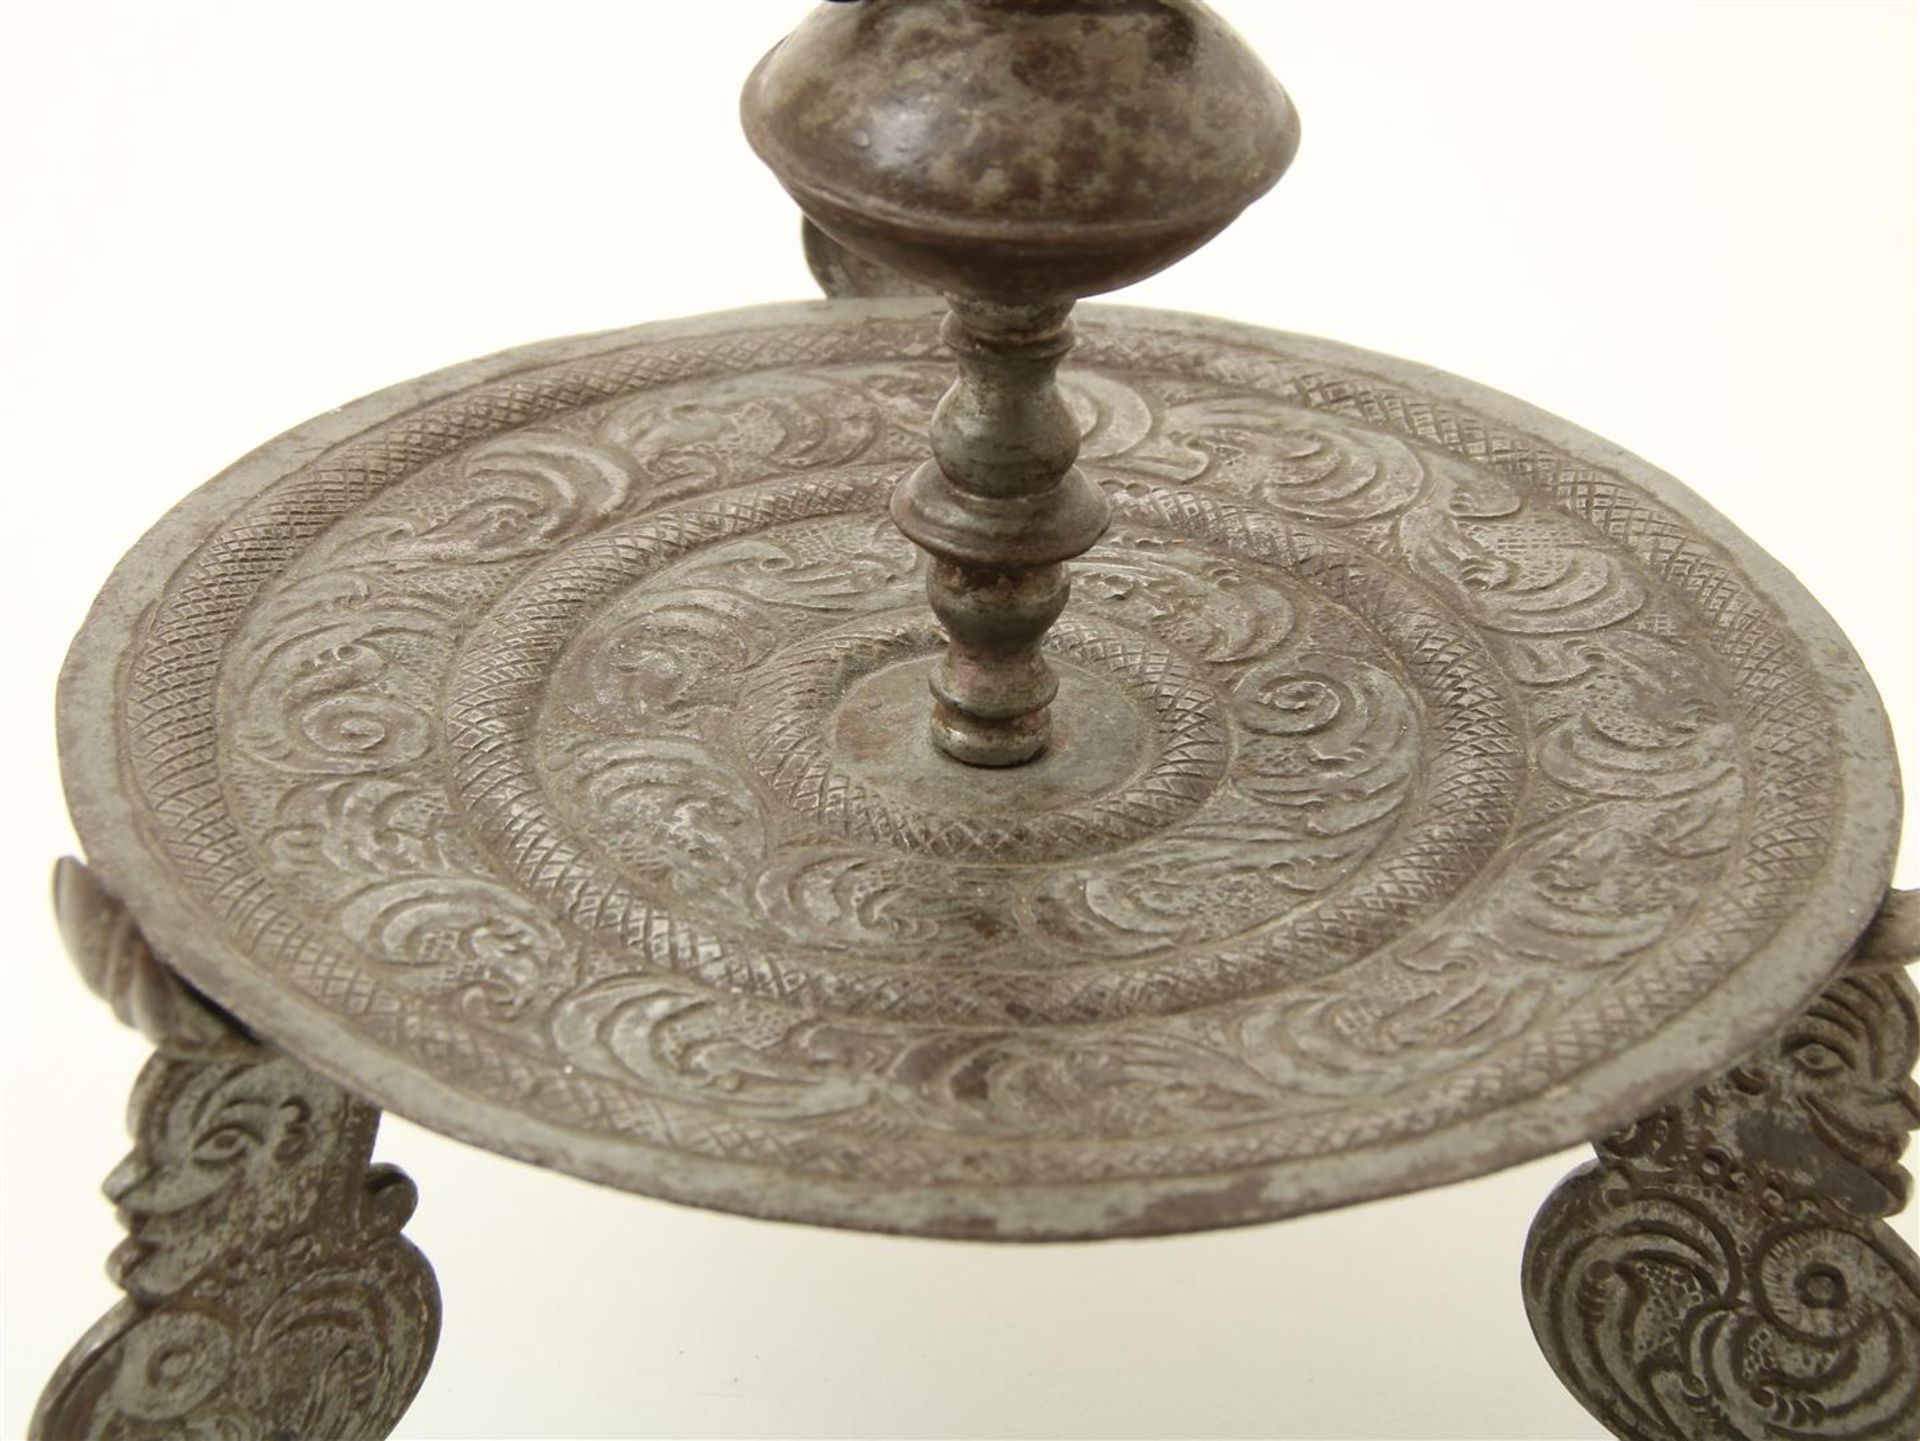 Iron candlestick, decorated with leaf motifs and legs with portraits, possibly Germany, 18th - Image 3 of 4